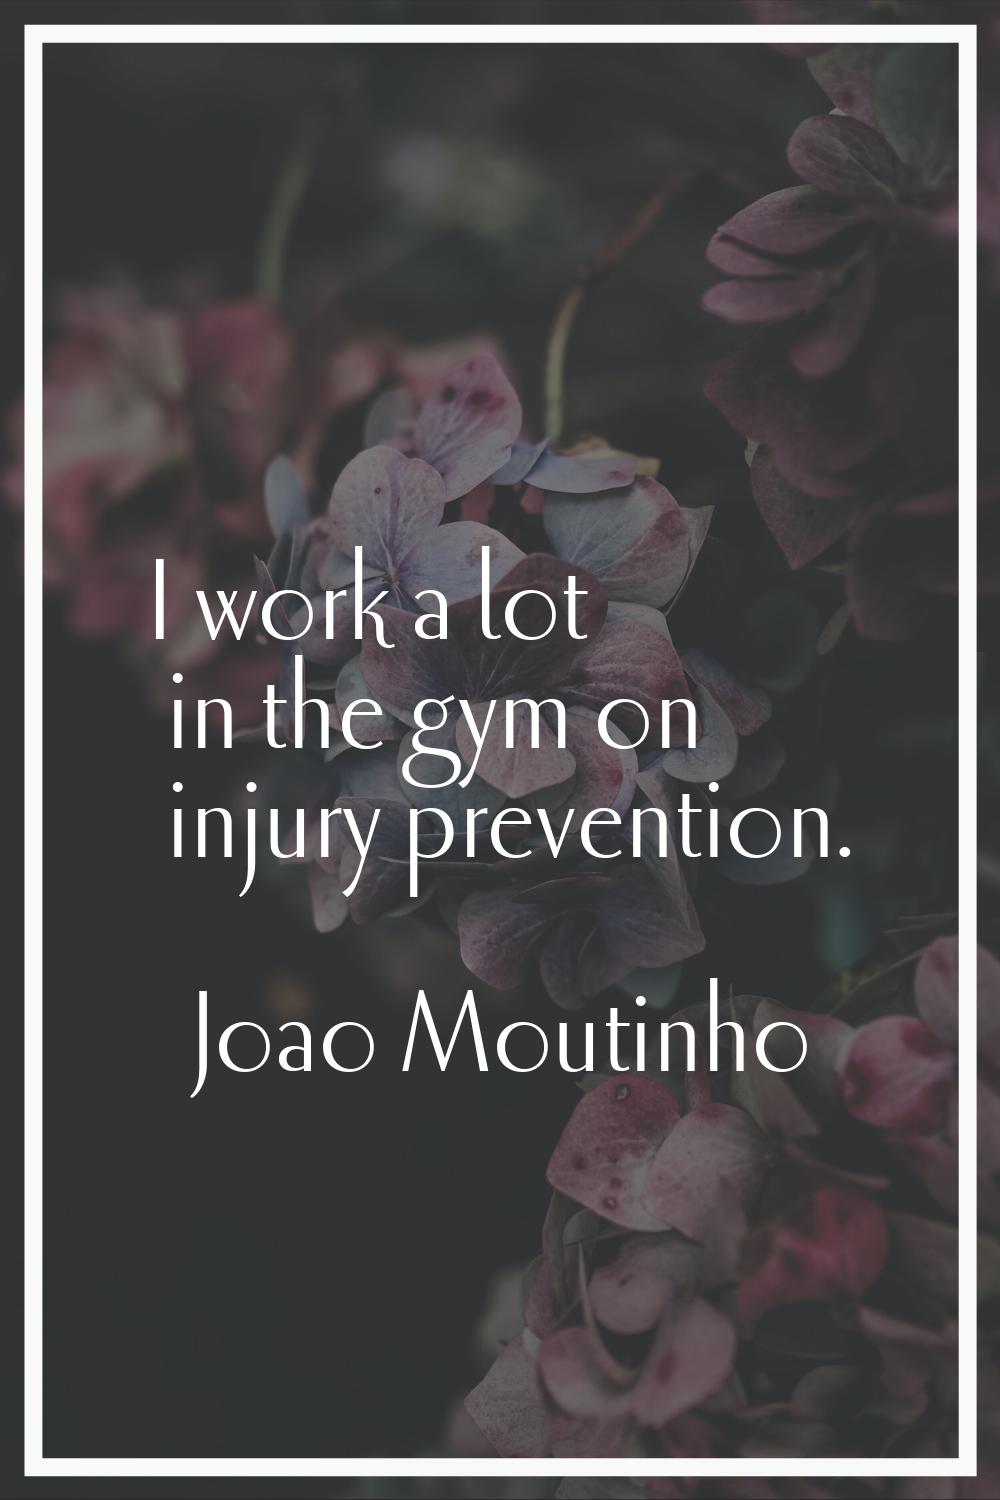 I work a lot in the gym on injury prevention.